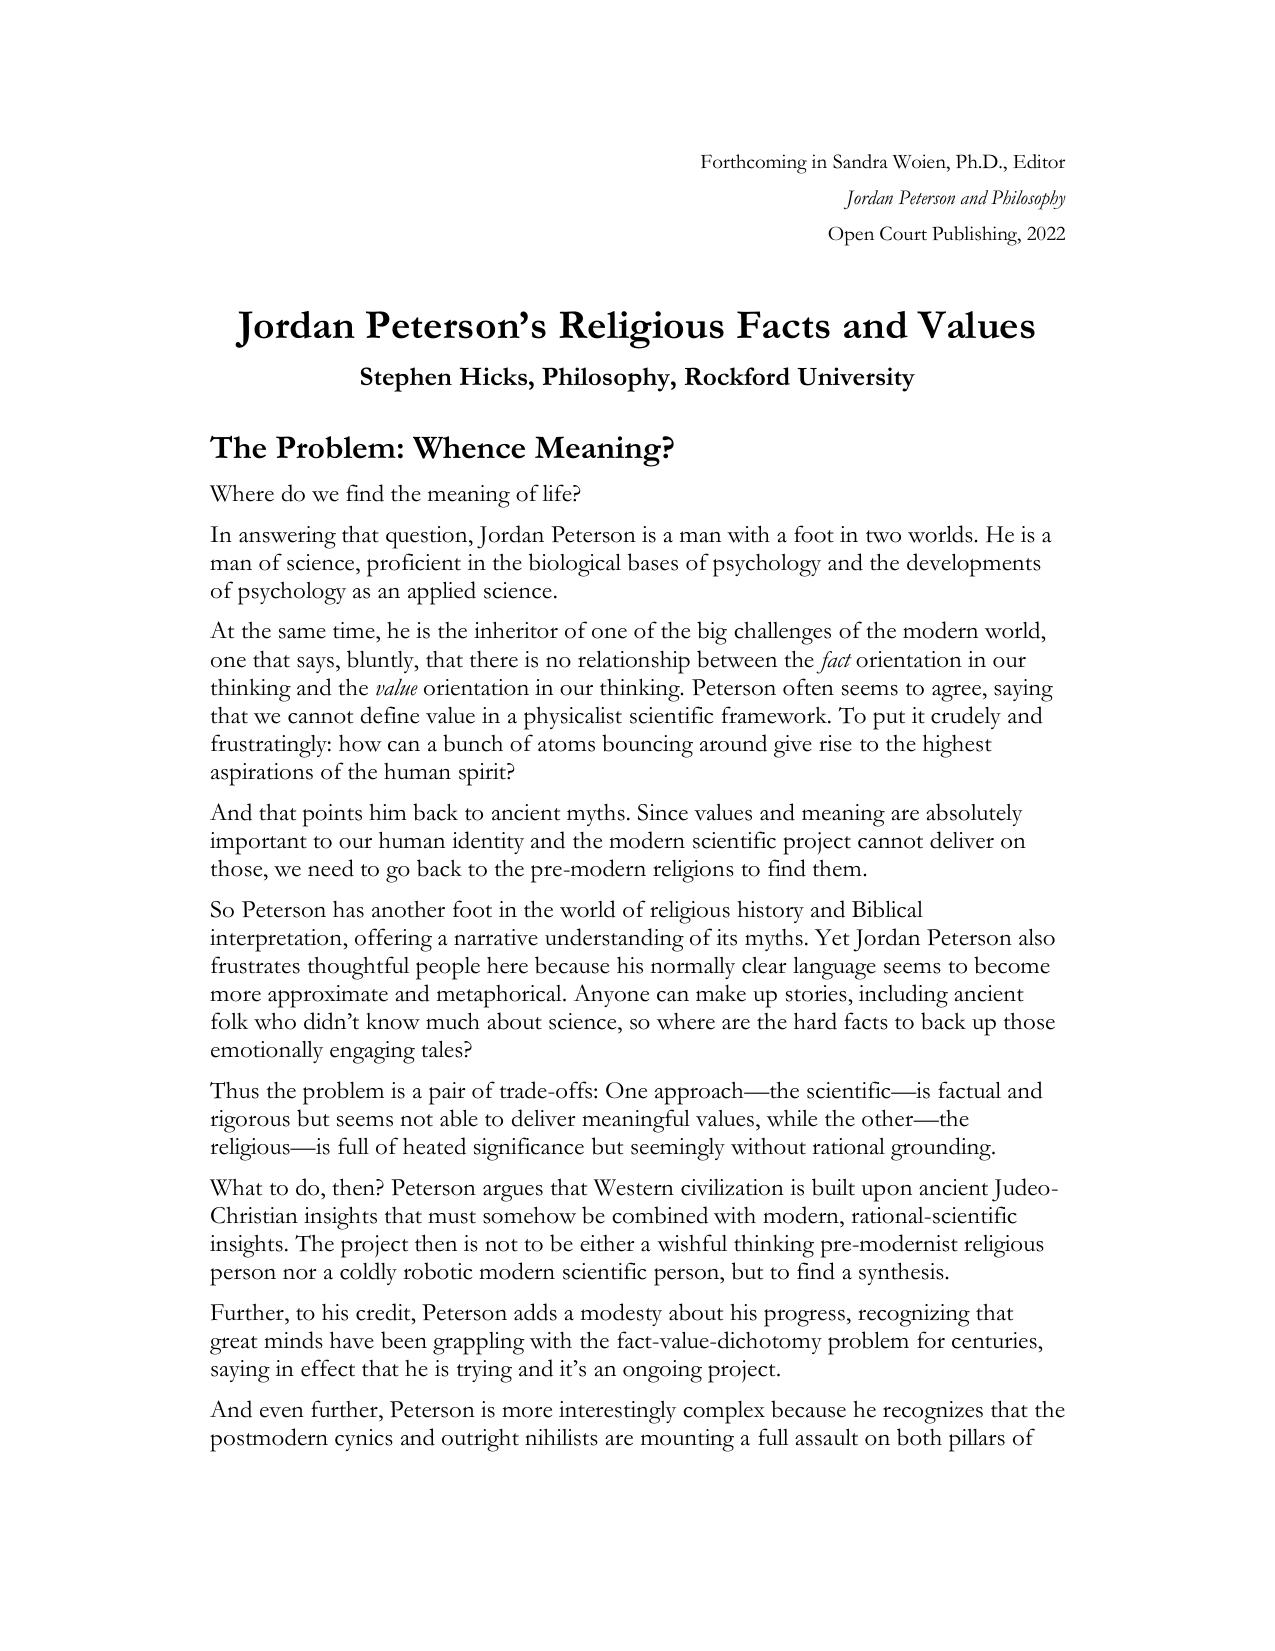 Jordan Petersons Religious Facts and Values